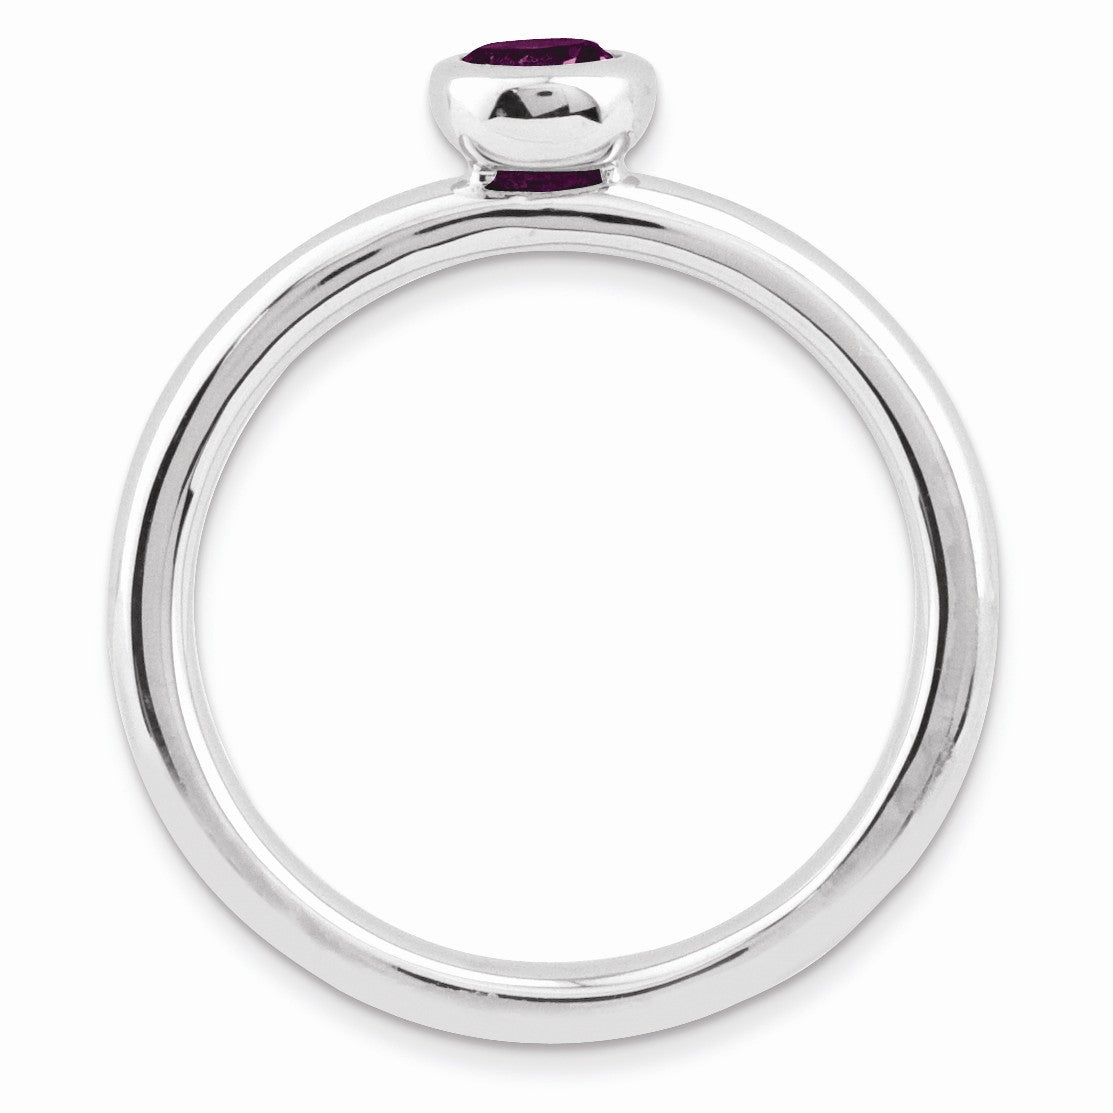 Alternate view of the Stackable Low Profile 4mm Rhodolite Garnet Silver Ring by The Black Bow Jewelry Co.